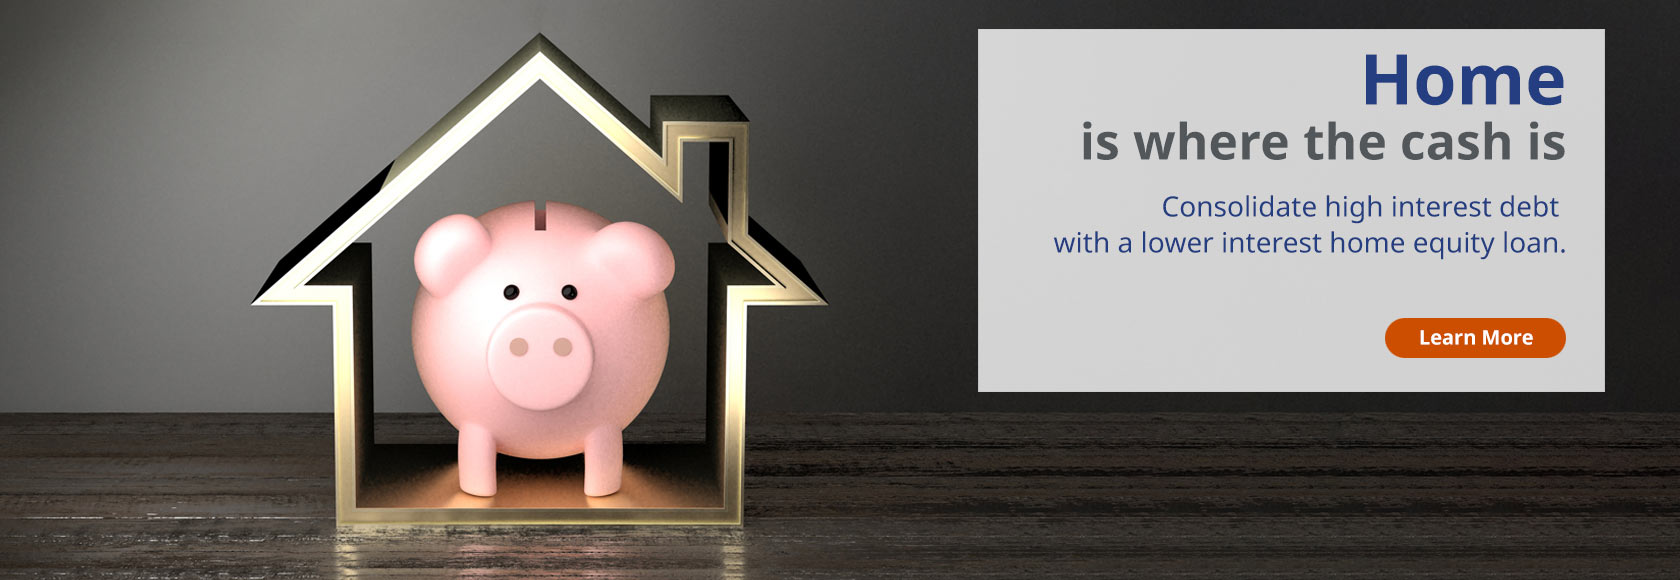 Home is where the cash is. Consolidate high interest debt with a lower interest home equity loan.
Learn More